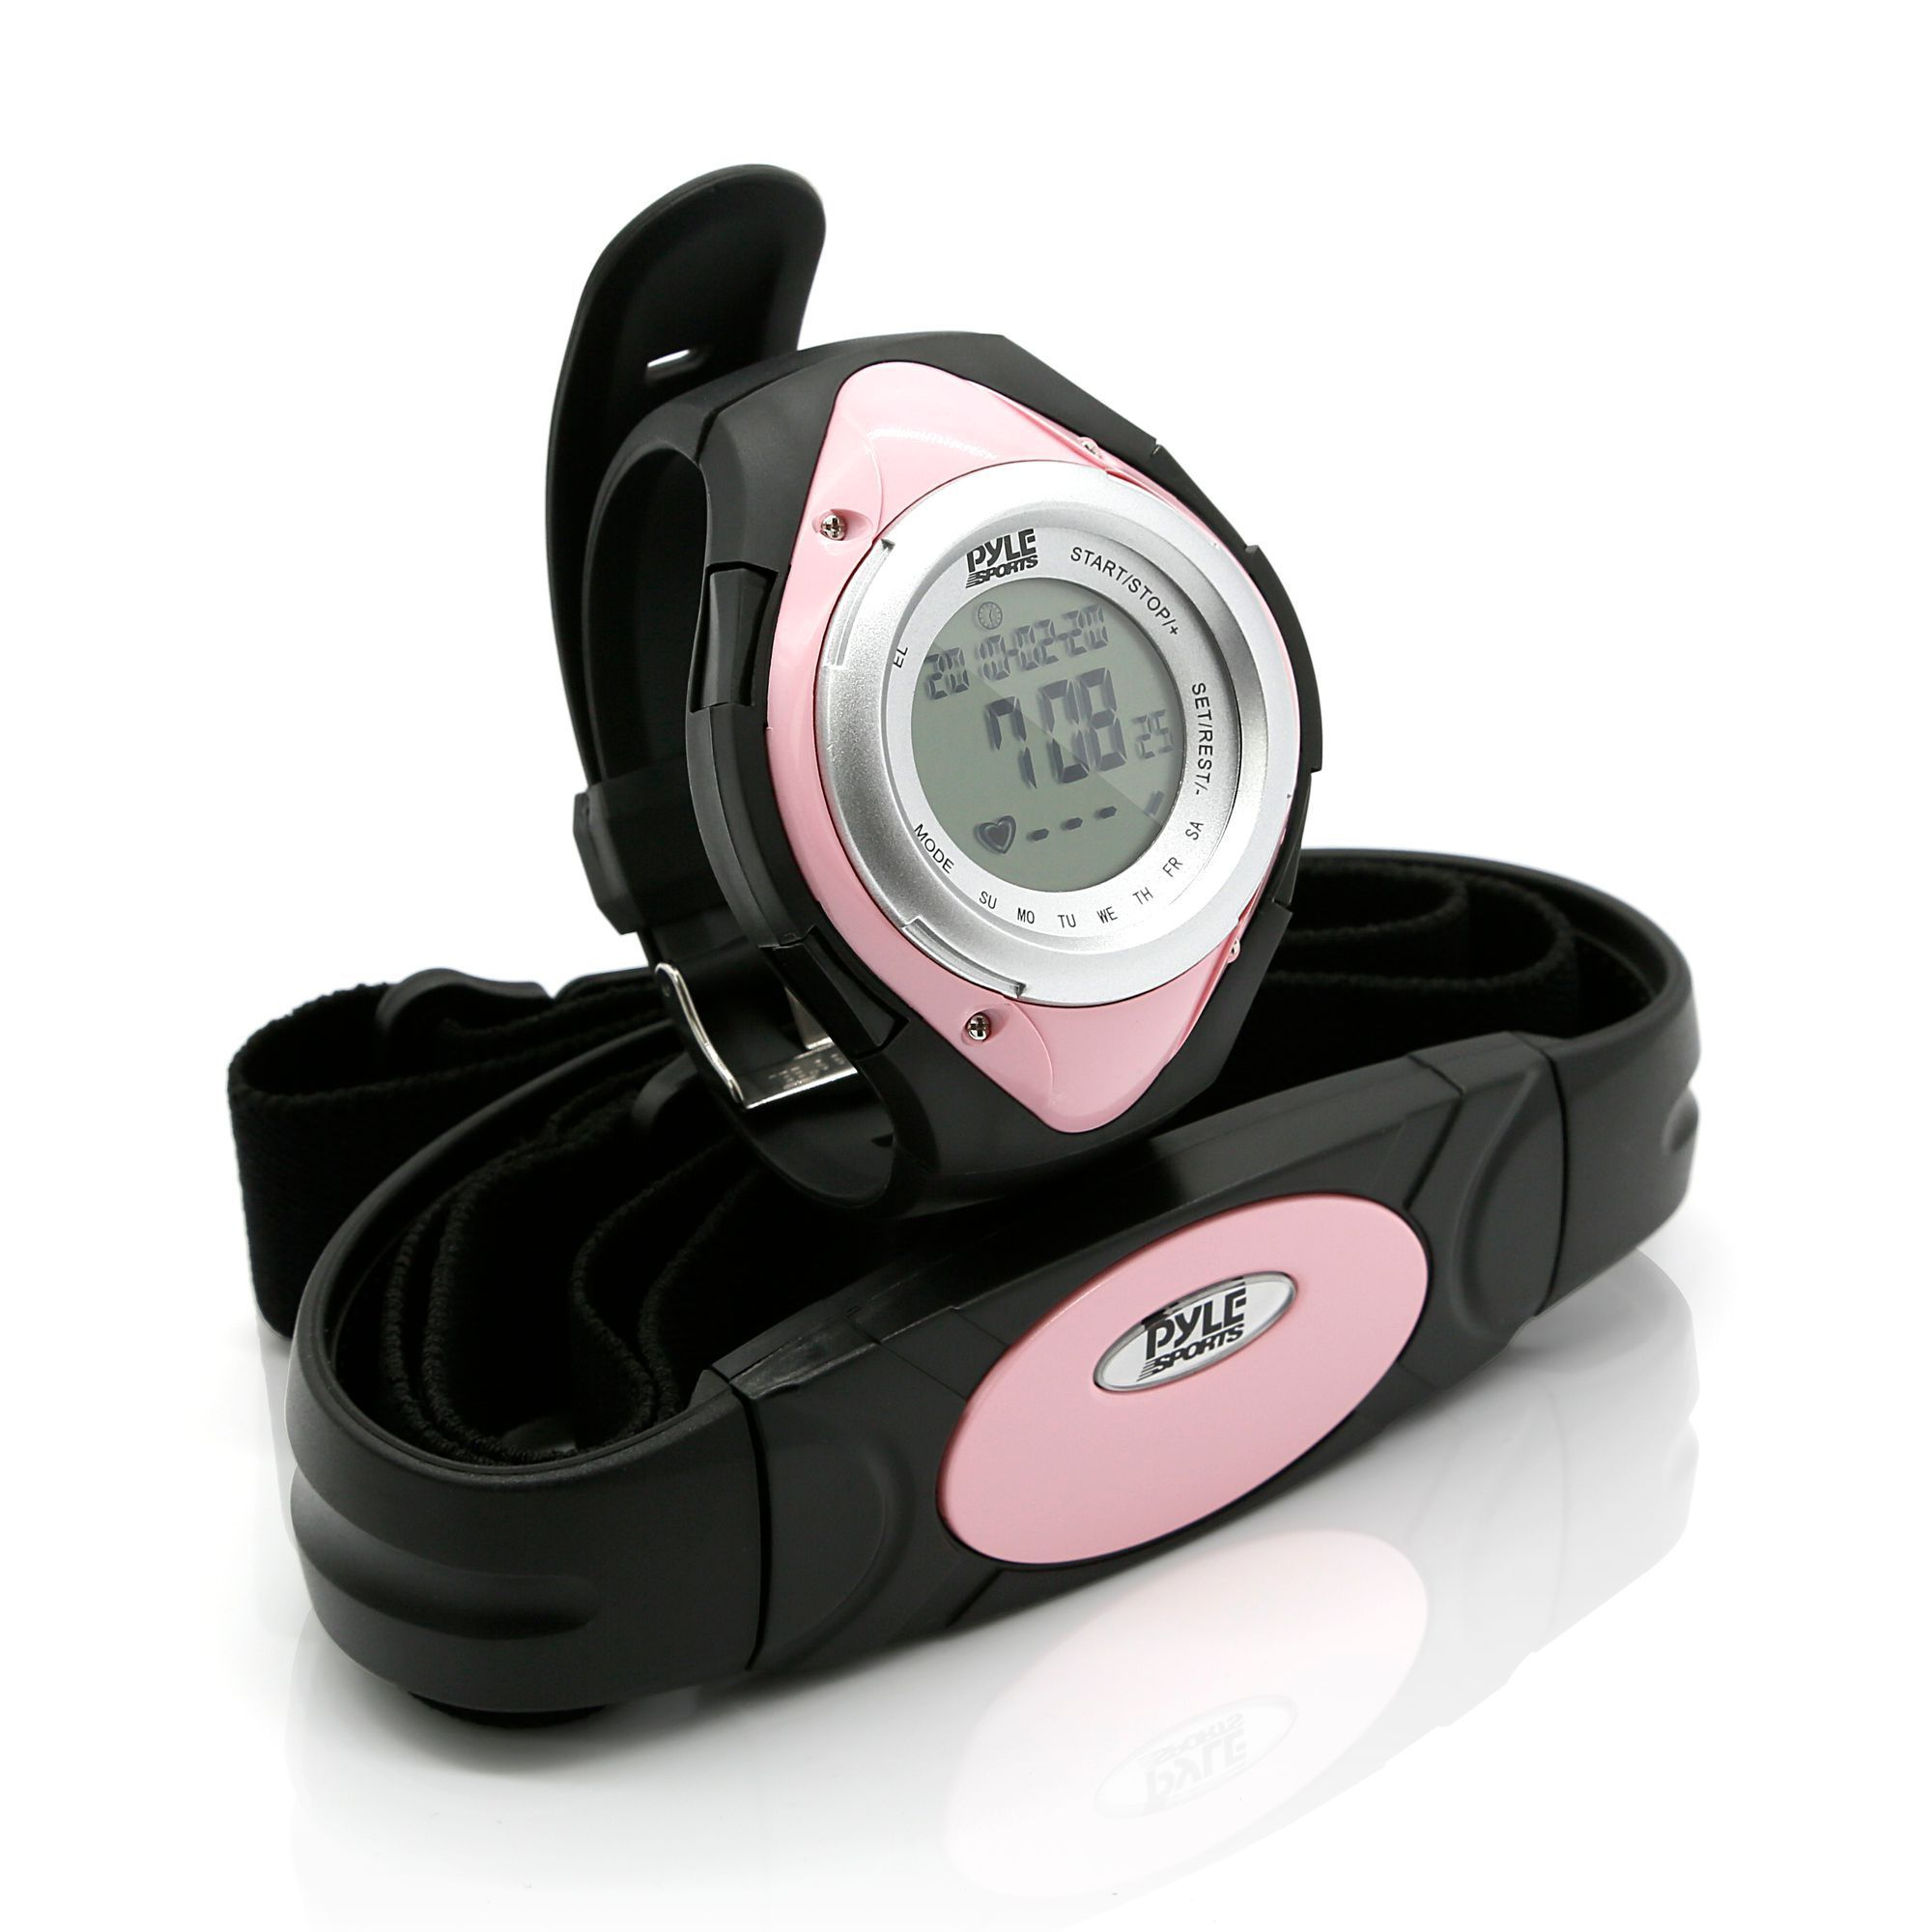 Pyle Heart Rate Monitor Wrist Watch & Belt, Activity Fitness Tracker, Water Resistant - Pink (PHRM38PN)